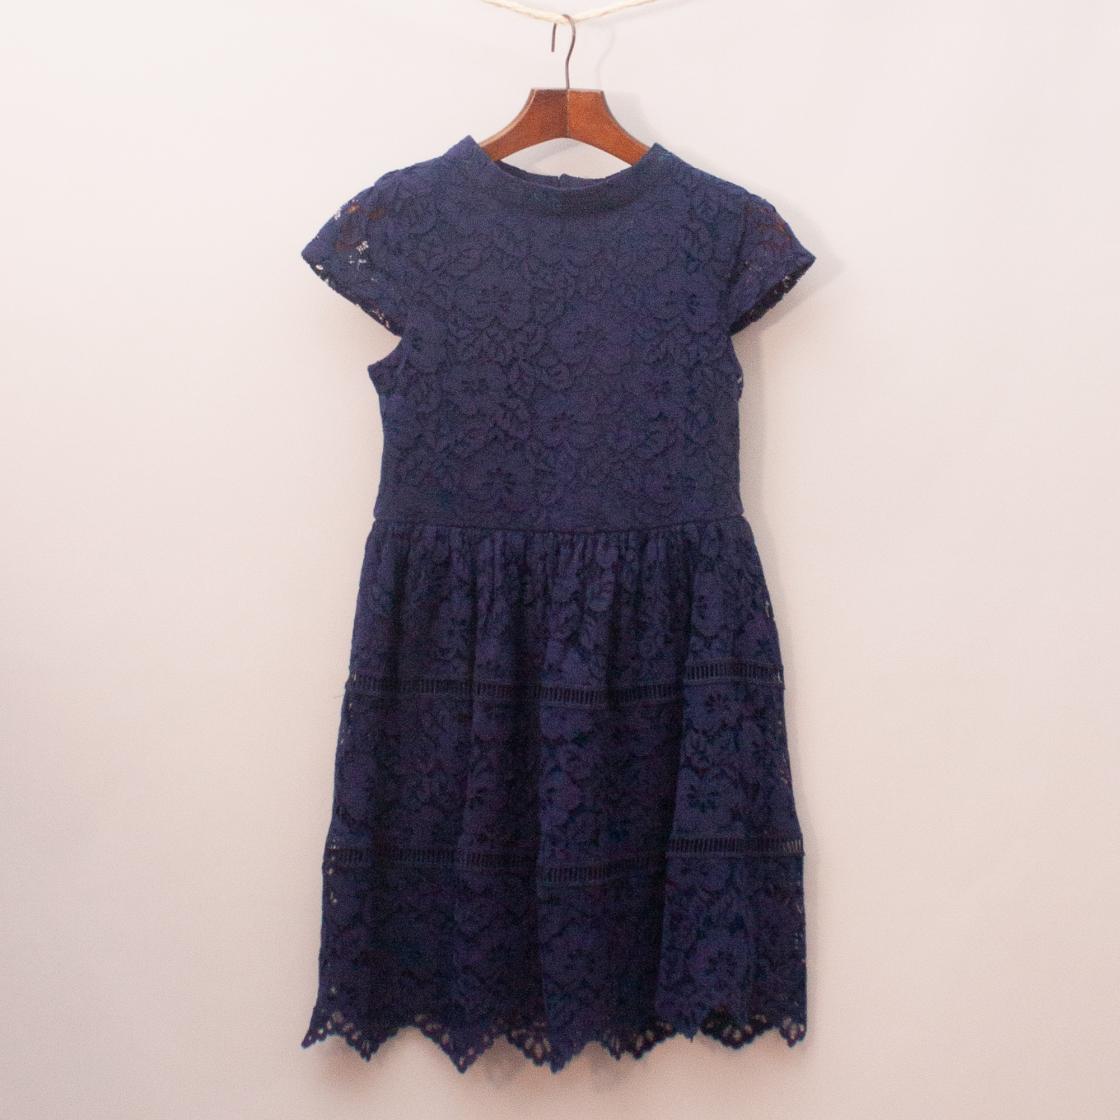 Origami Lace Dress